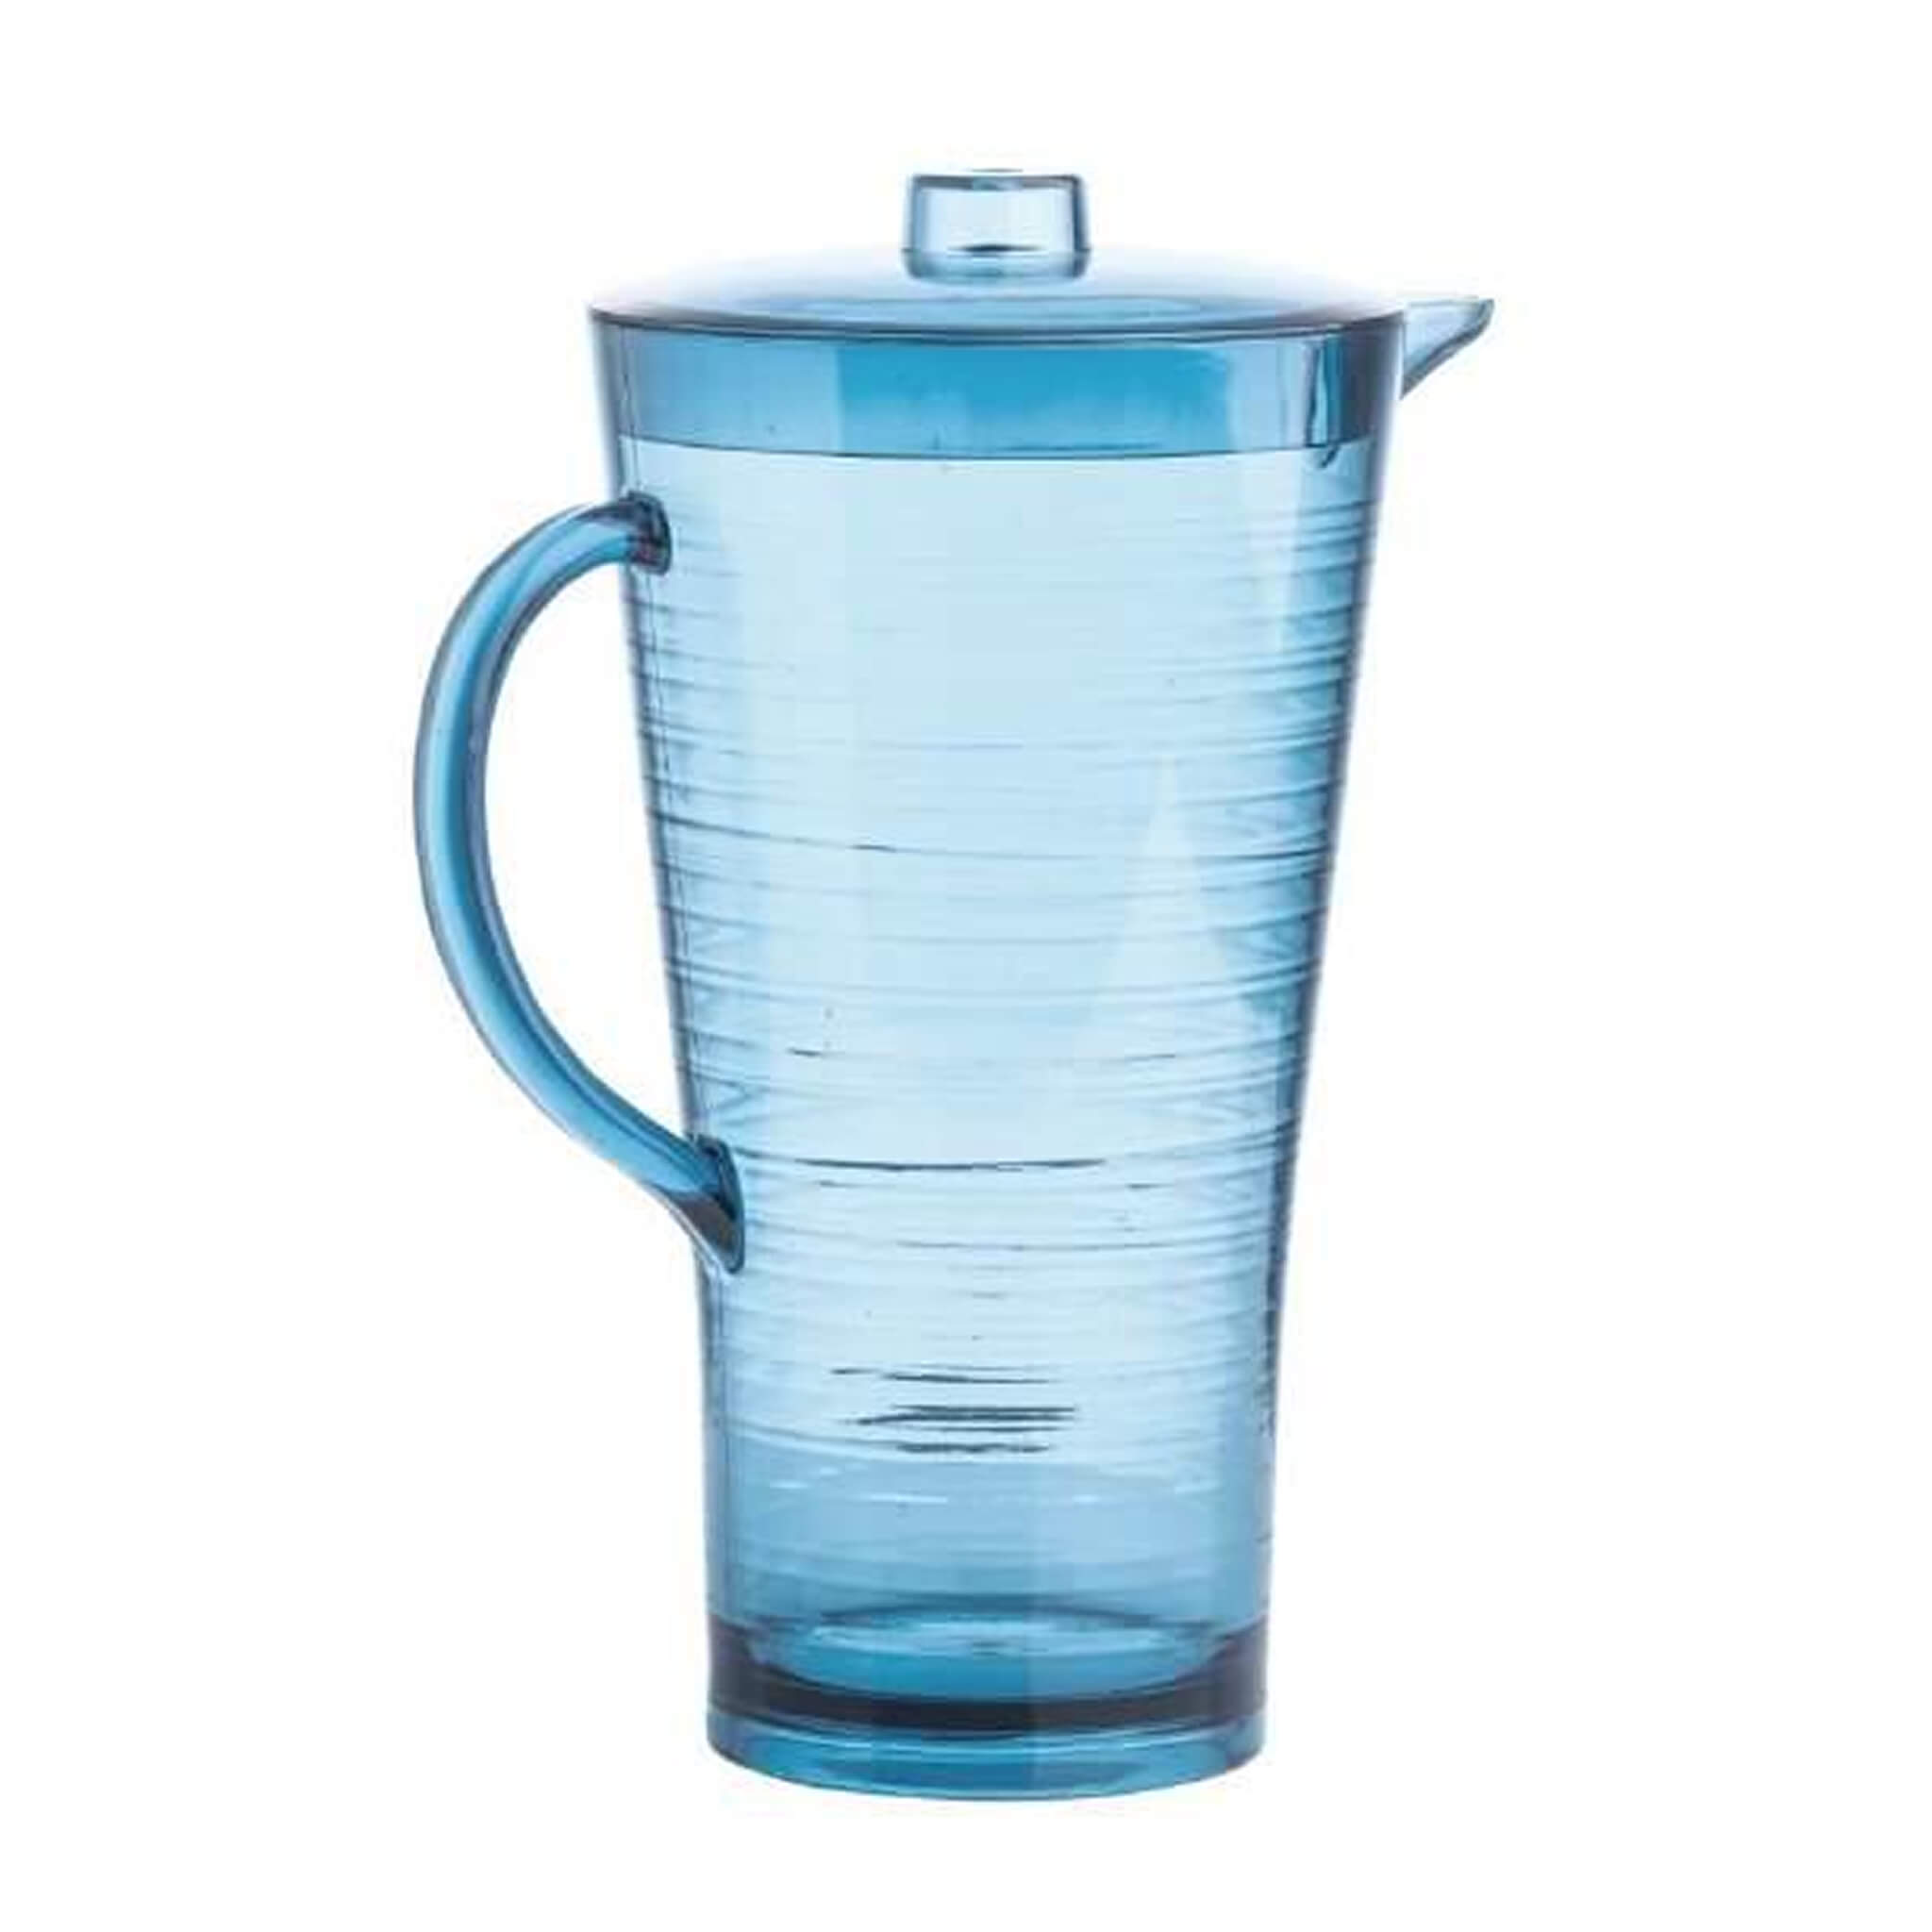 Linear Pitcher - Alfresco Dining Company